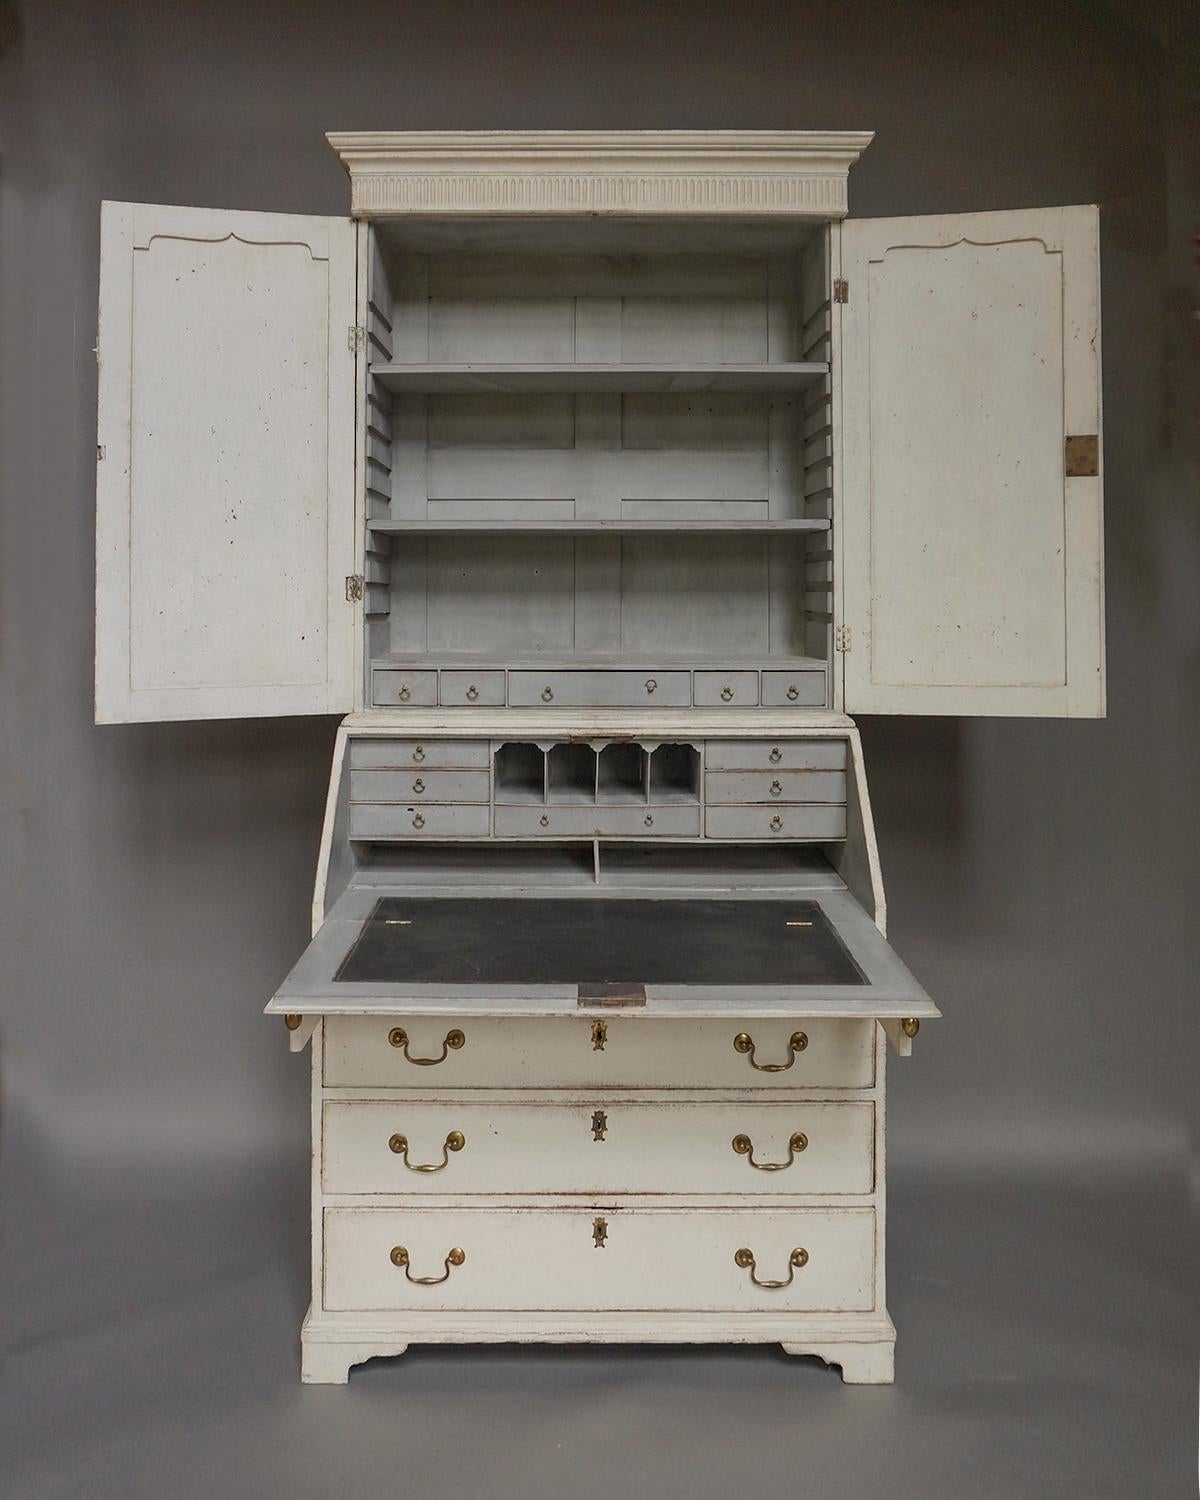 Gustavian period secretary, Sweden circa 1790, in two parts. The upper section has a simple cornice with reeded detail over two doors with shaped, recessed panels. The interior has two adjustable shelves and five small drawers. The lower section has